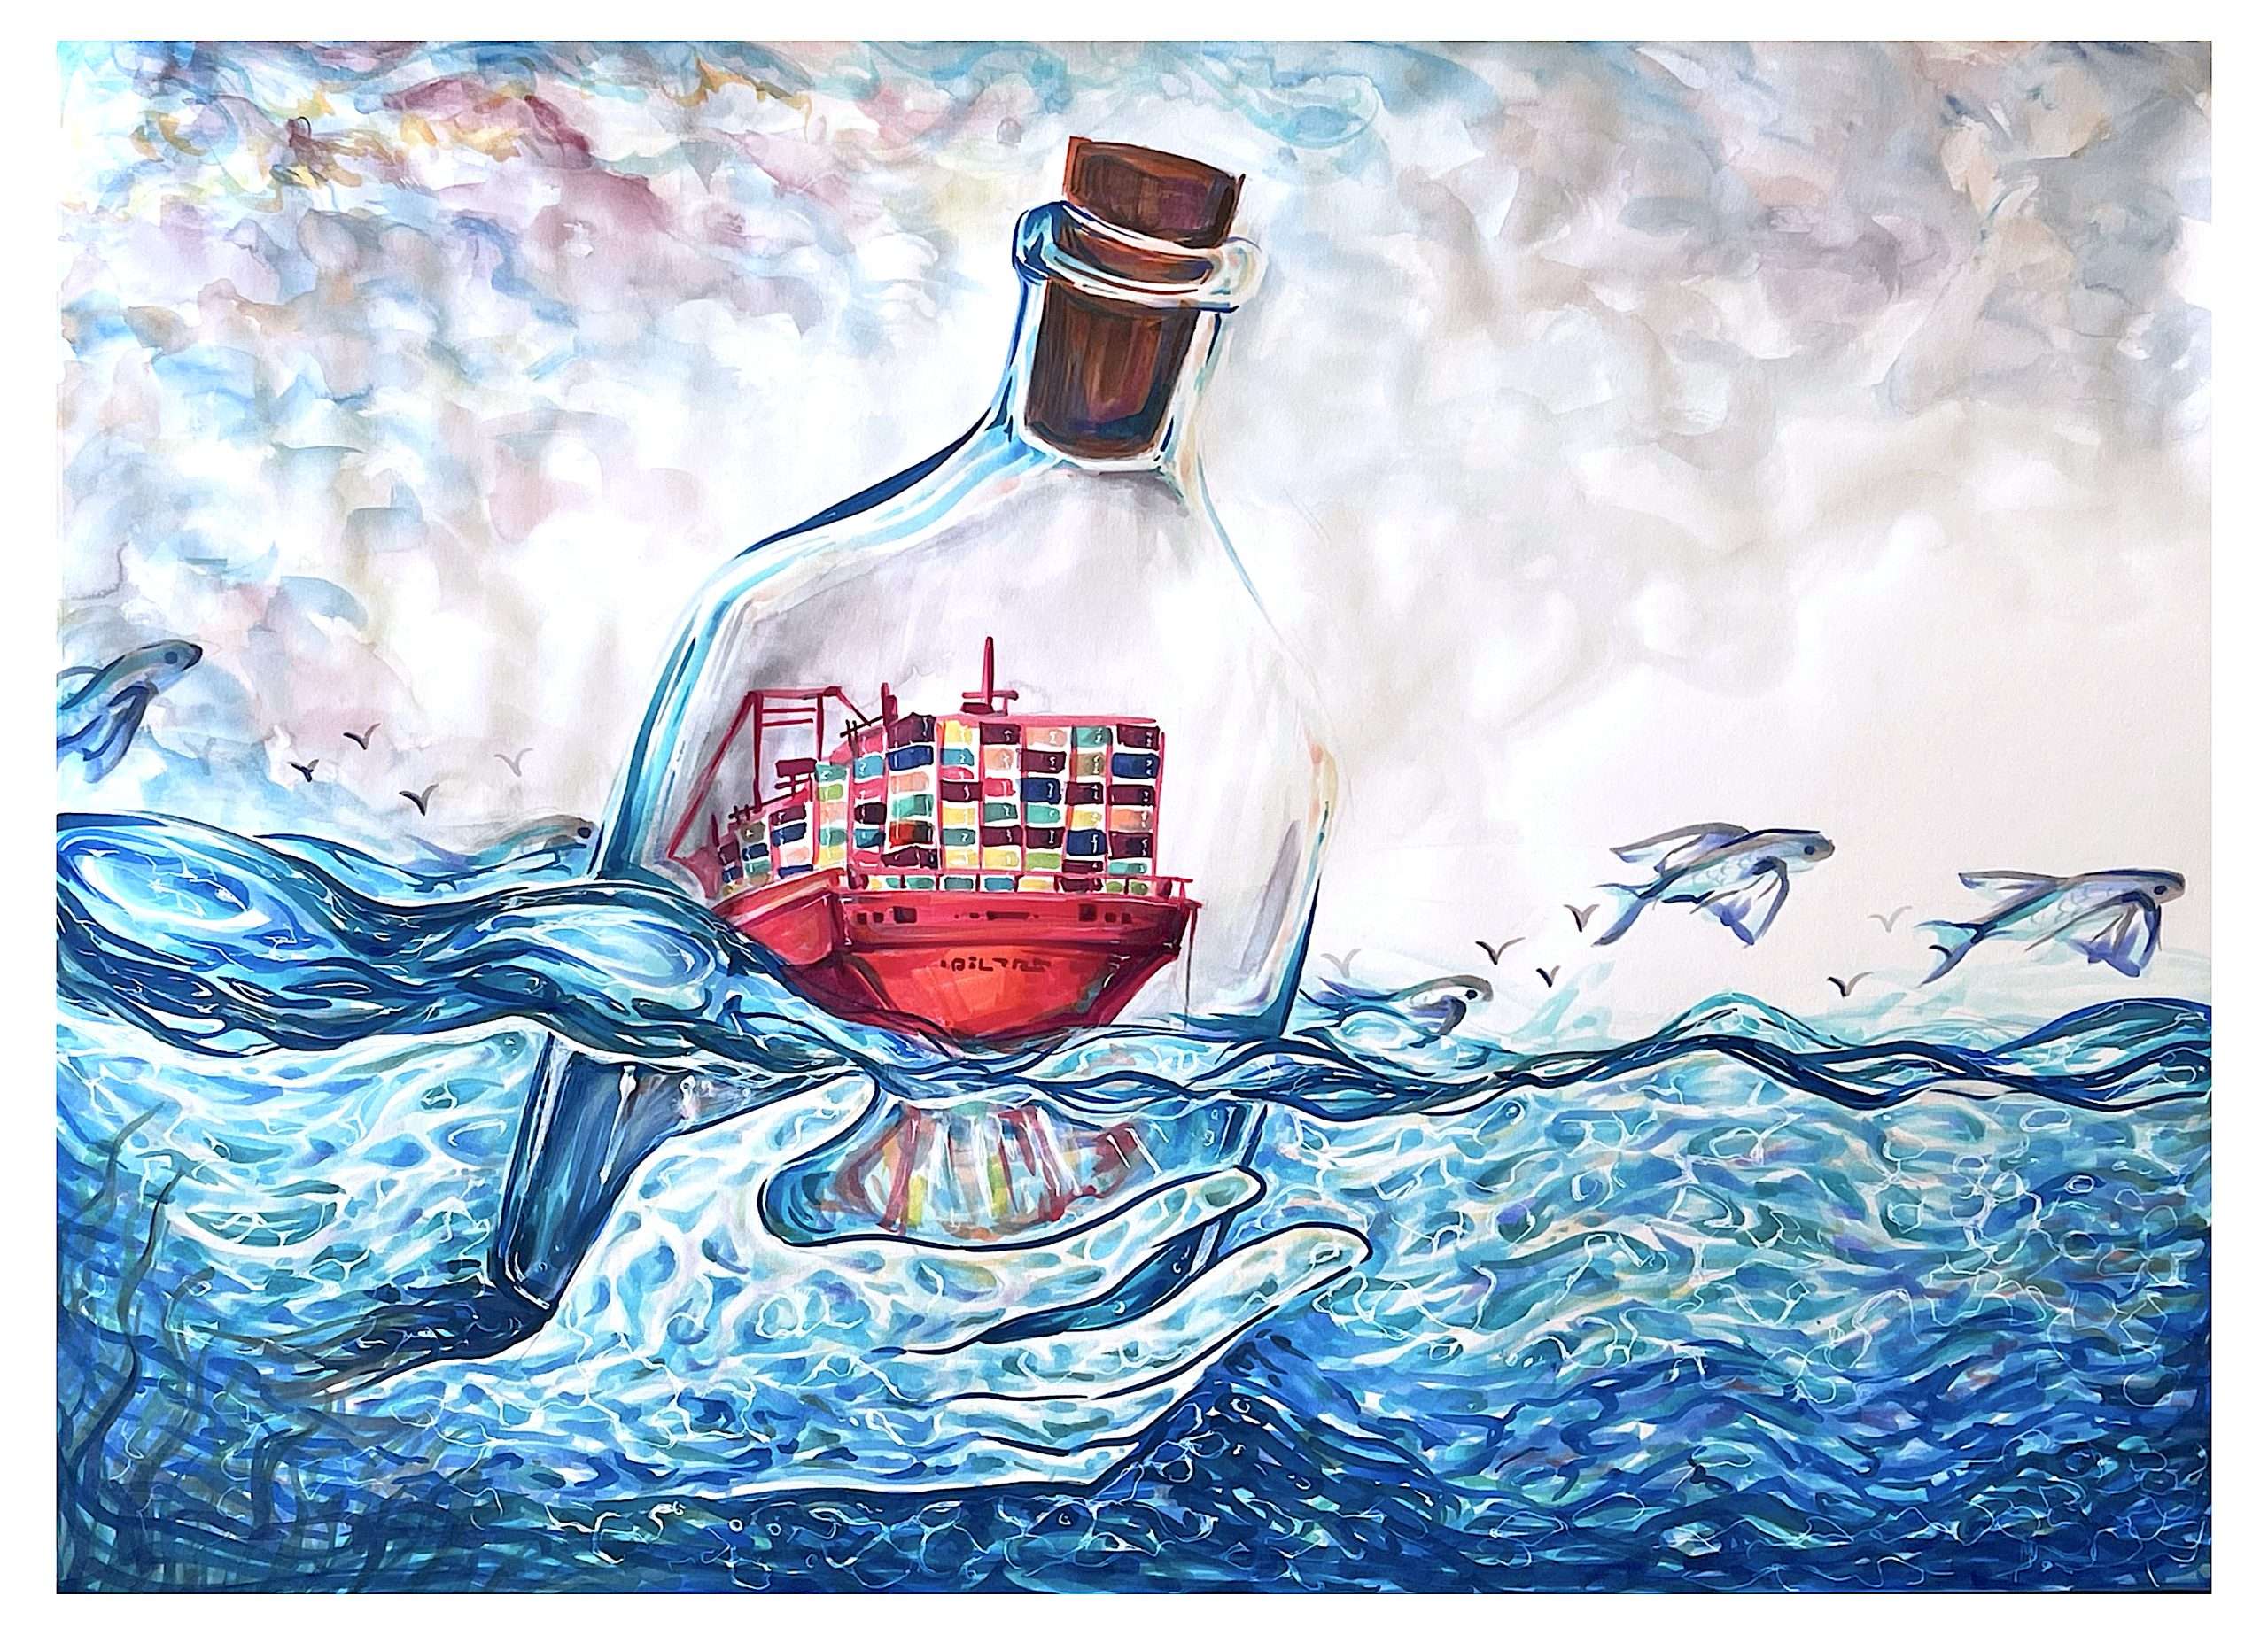 Drawing of a glass bottle with a cork on top. Inside the glass bottle is a red ship with several shipping containers. The glass bottle is half submerged in the ocean and half out of the ocean. Within the submerged part is an ocean colored hand holding the bottom of the bottle. There are two flying fishing jumping out of the water on the right side.